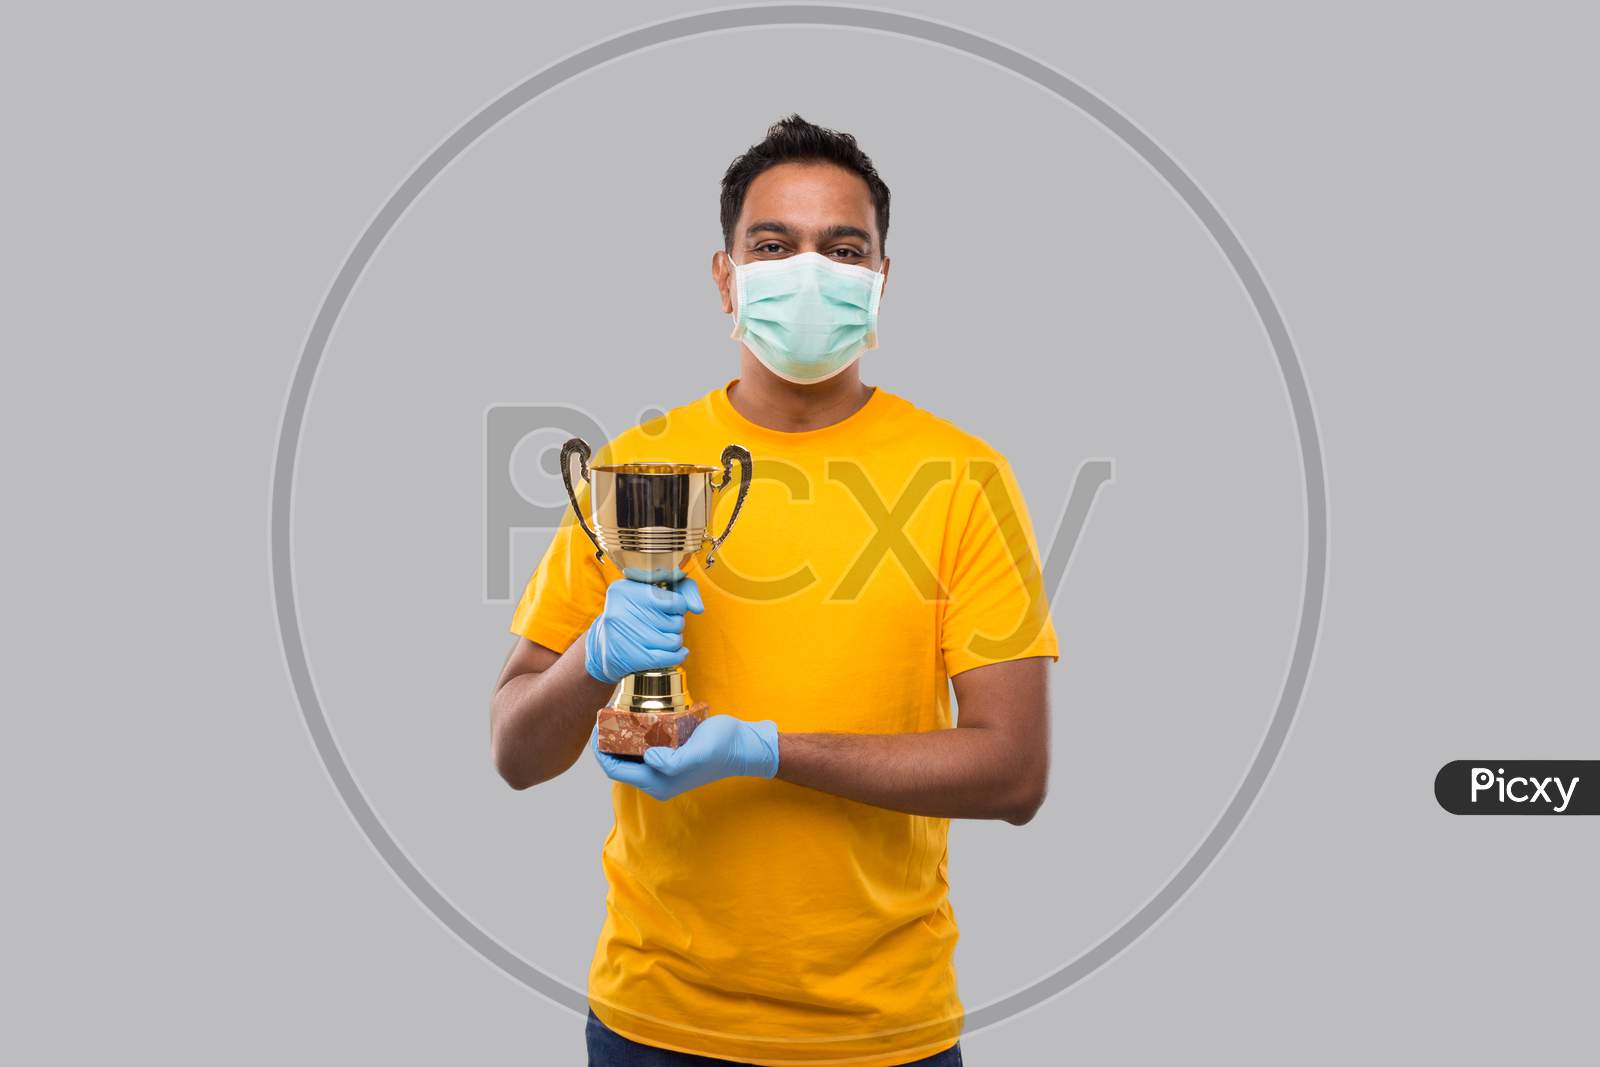 Indian Man Holding Trophy In Hands Wearing Medical Mask And Gloves Isolated